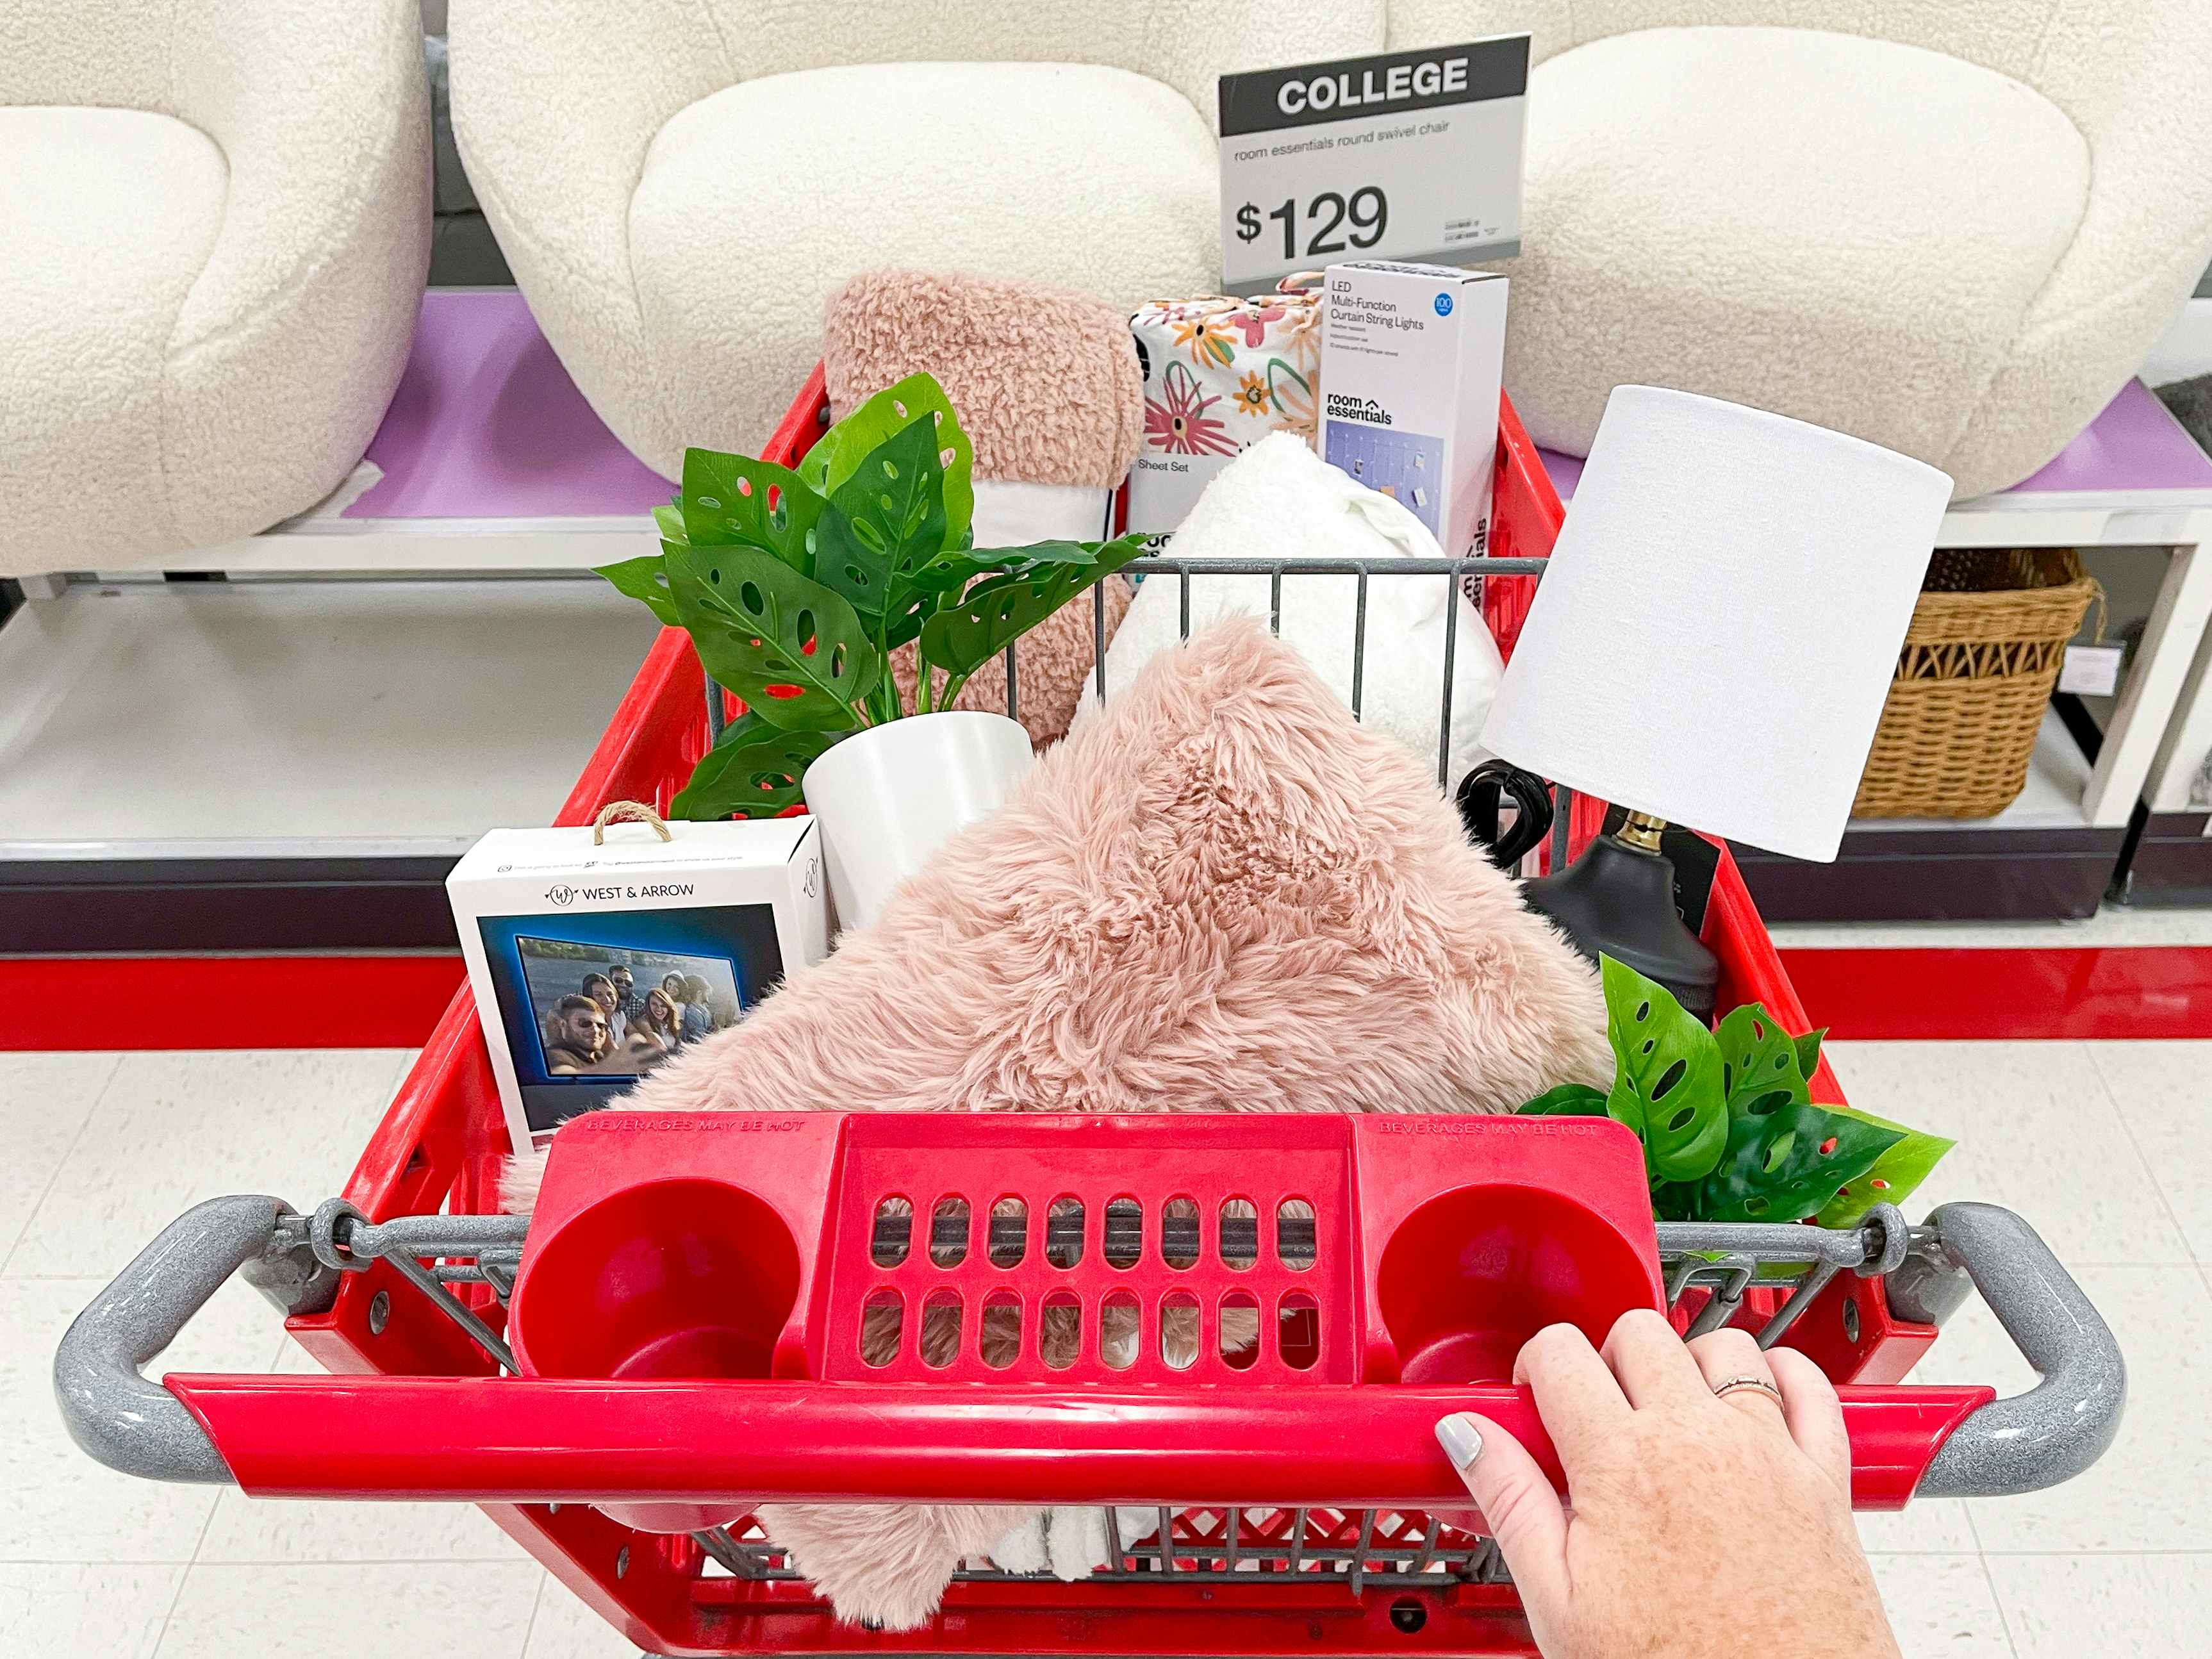 A Target shopping cart filled with various items from Target's College shop.